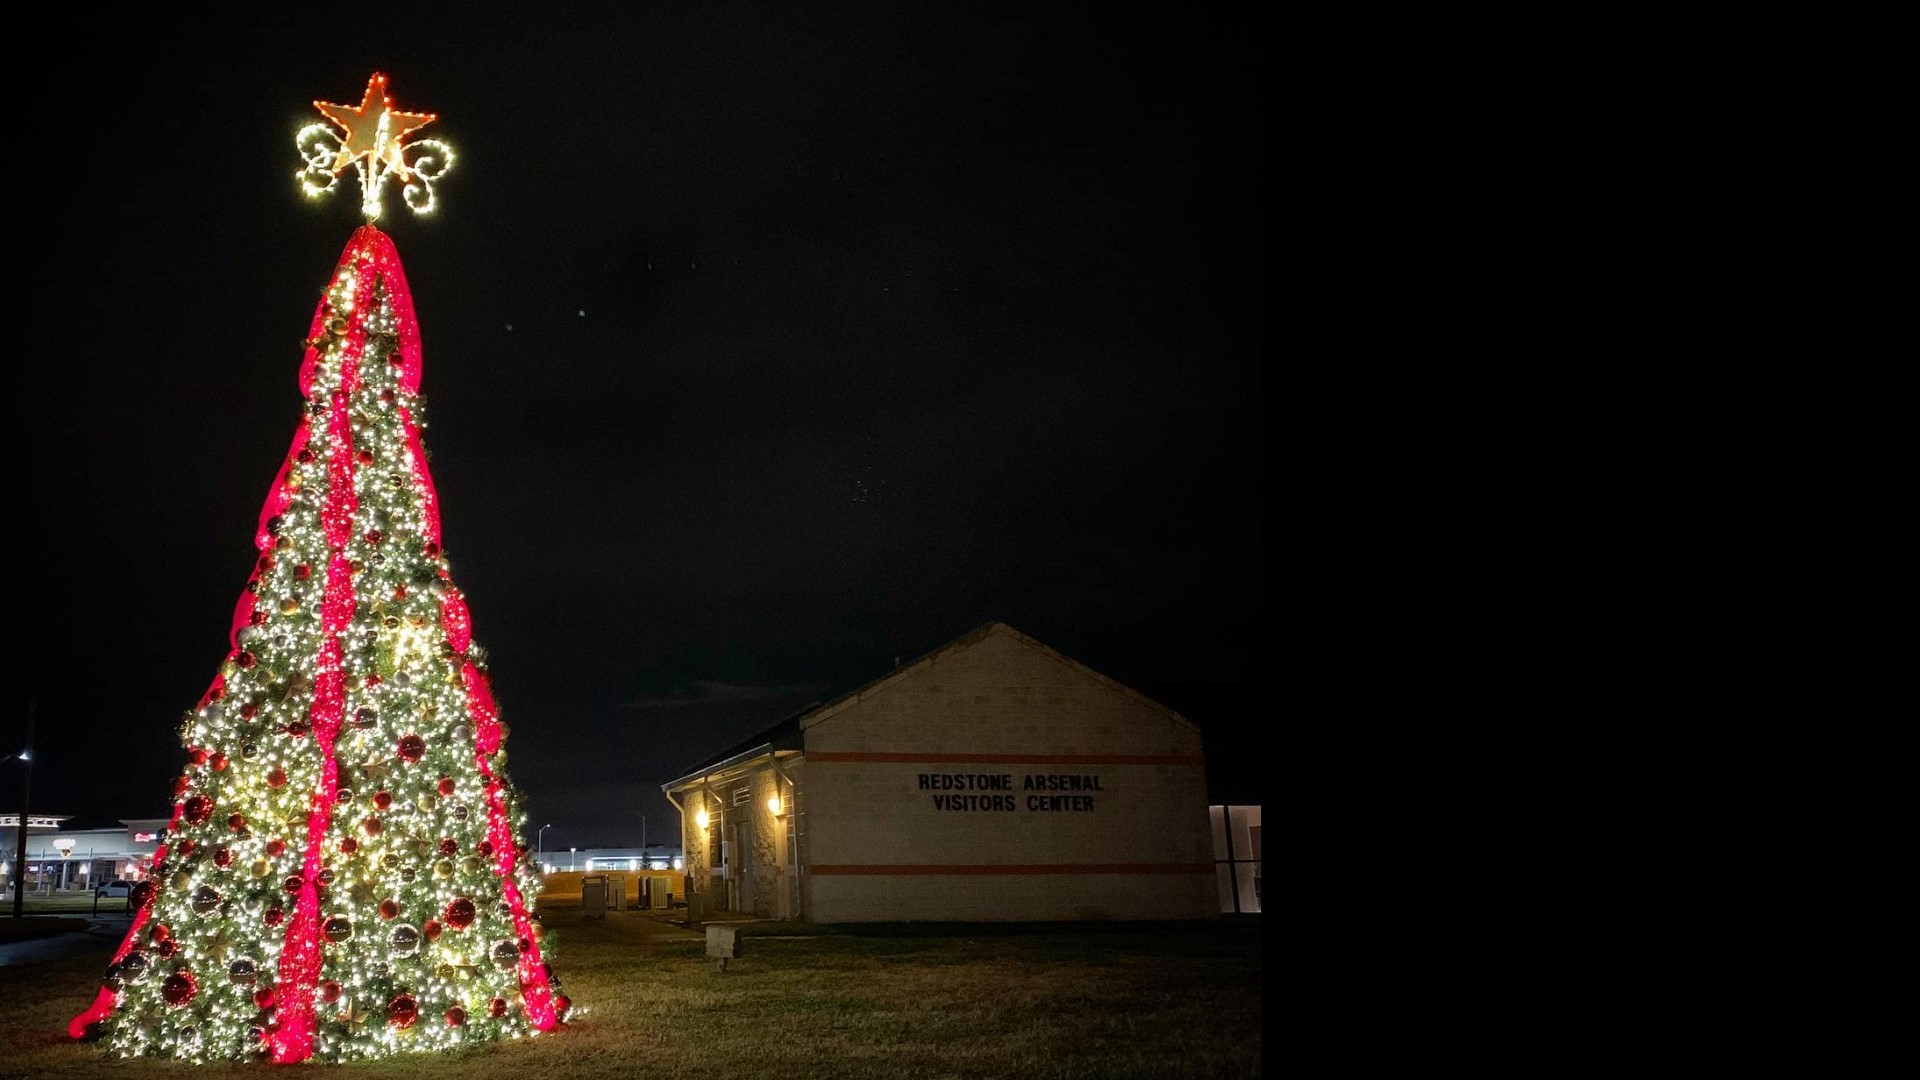 The Redstone Family & MWR Holiday Market and Tree Lighting are on Dec. 2 and Dec. 3, 2022.